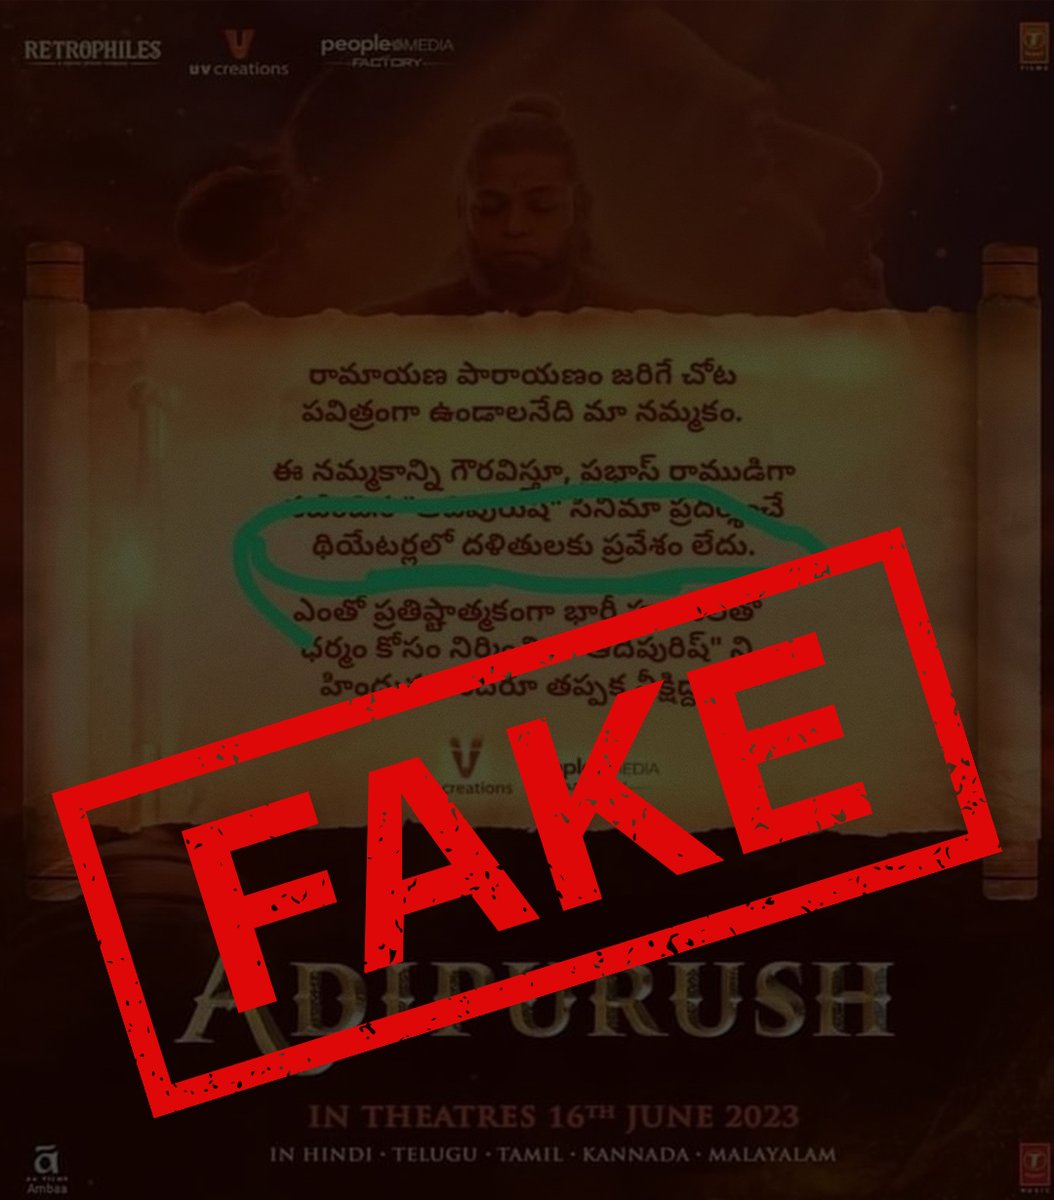 📢 Attention: The statements made in the #Adipurush Picture are false and misleading!

Team Adipurush firmly stands for Equality, emphasizing no discrimination based on caste, colour or creed.

Help us combat this evil by reporting it wherever you encounter it! 🙏…